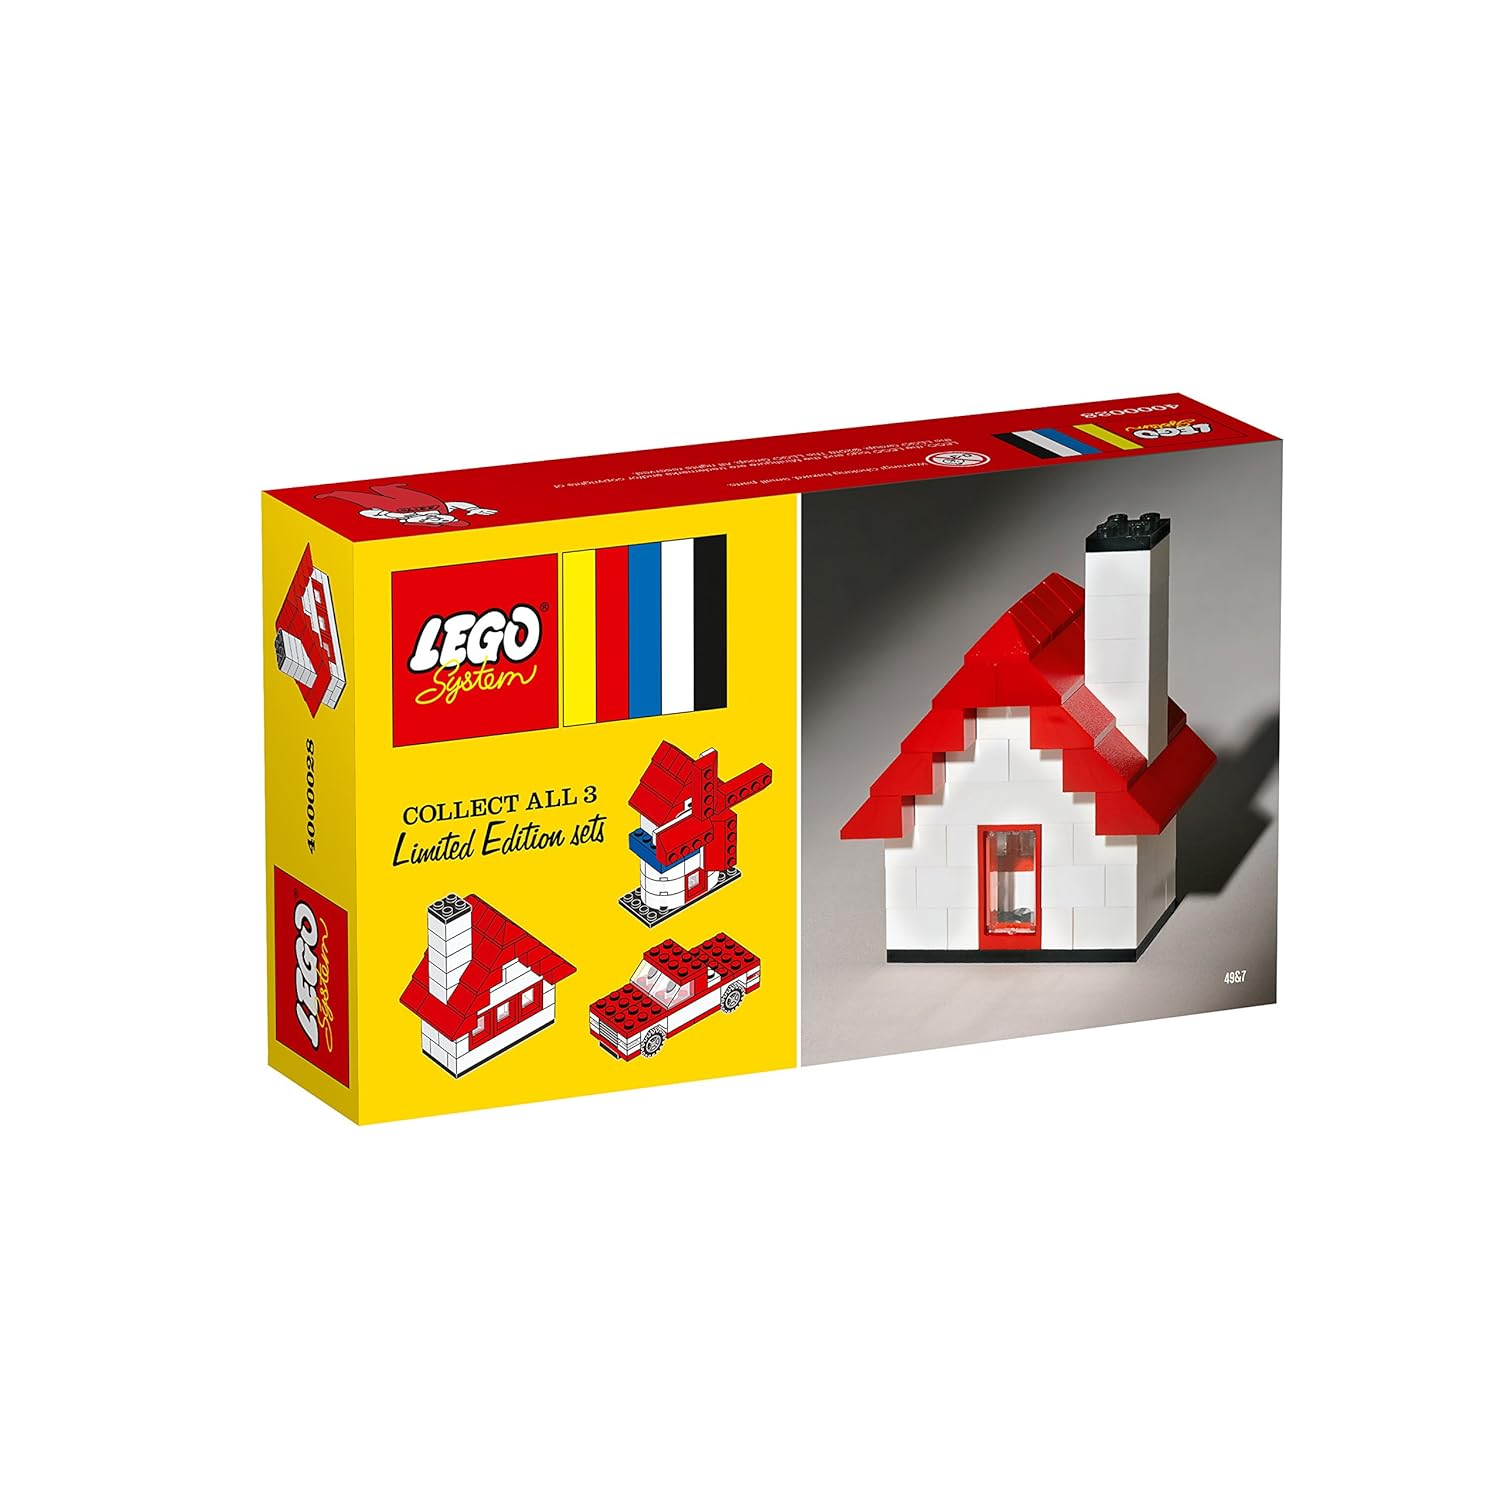 LEGO Classic 60th Anniversary Limited Edition House 4000028